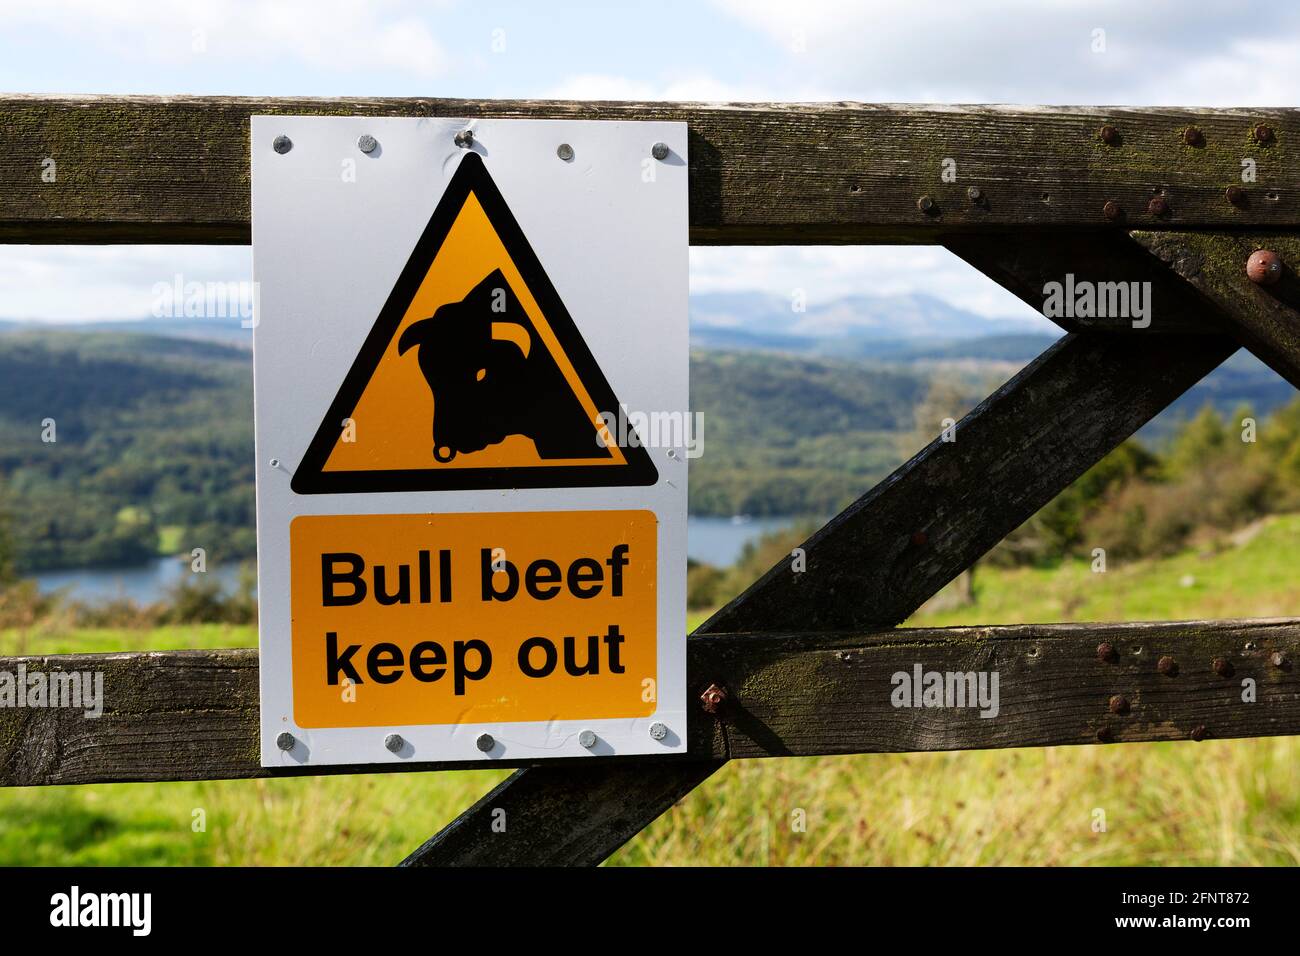 Sign warning people to keep out of a field in Cumbria, England. The field has a bull. Stock Photo